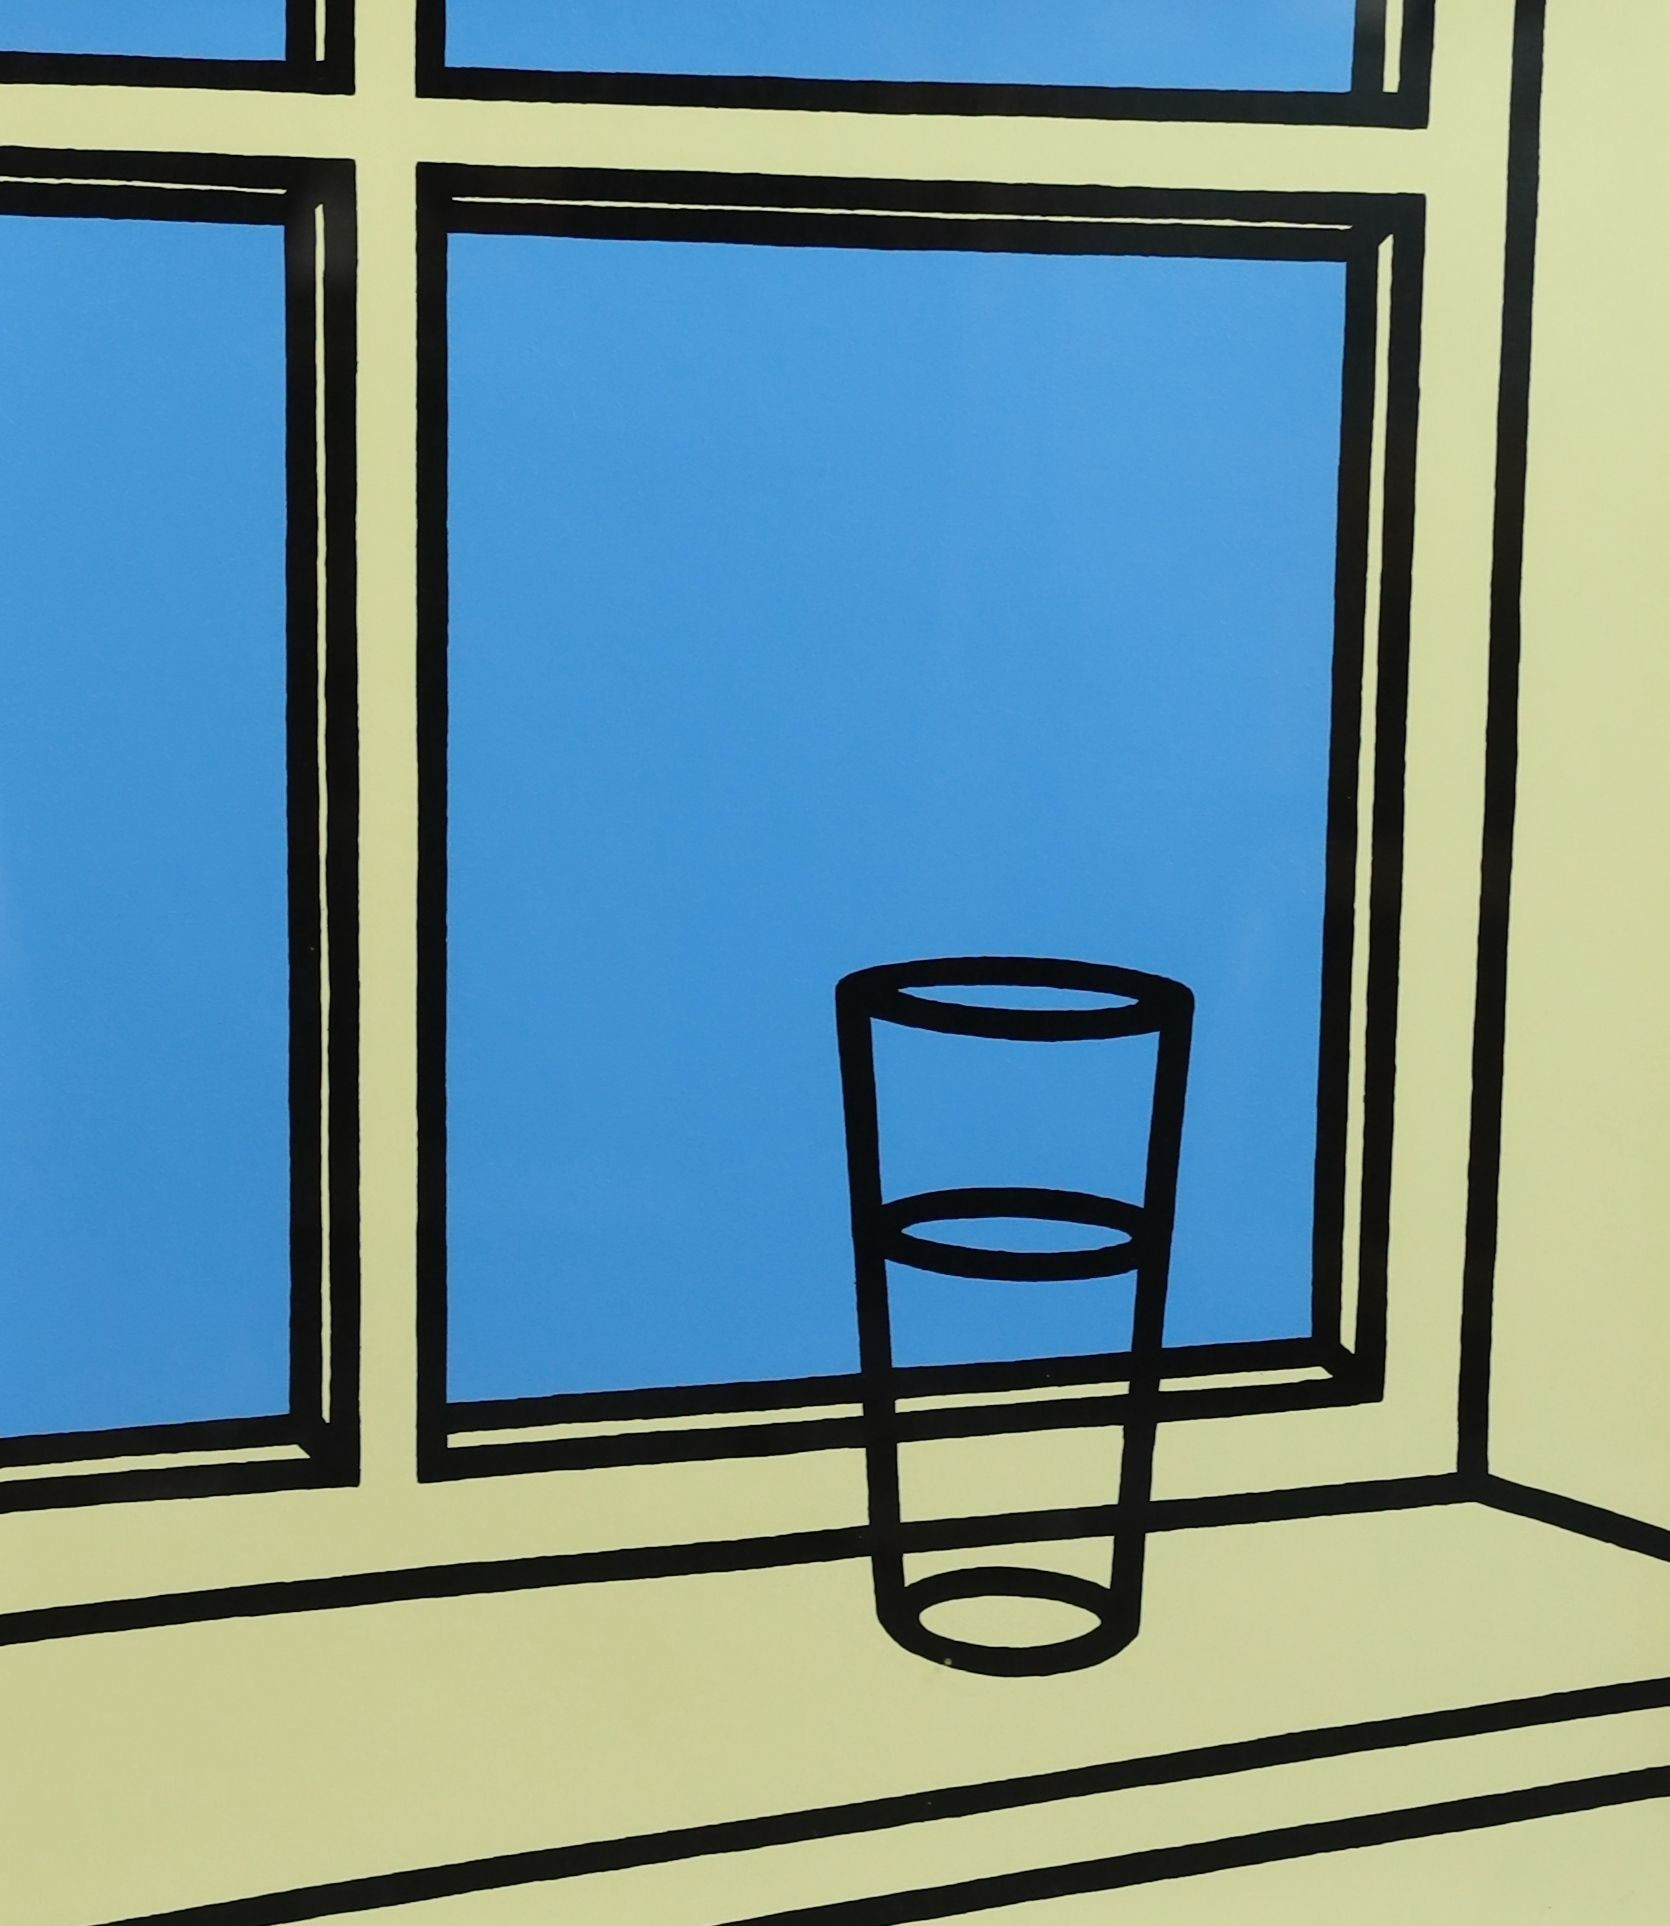 Patrick Caulfield (1936-2005), 'Oh Helen, I roam my room' from Some Poems of Jules Laforge, screenprint in colours, on Neobond, 40 x 35cm